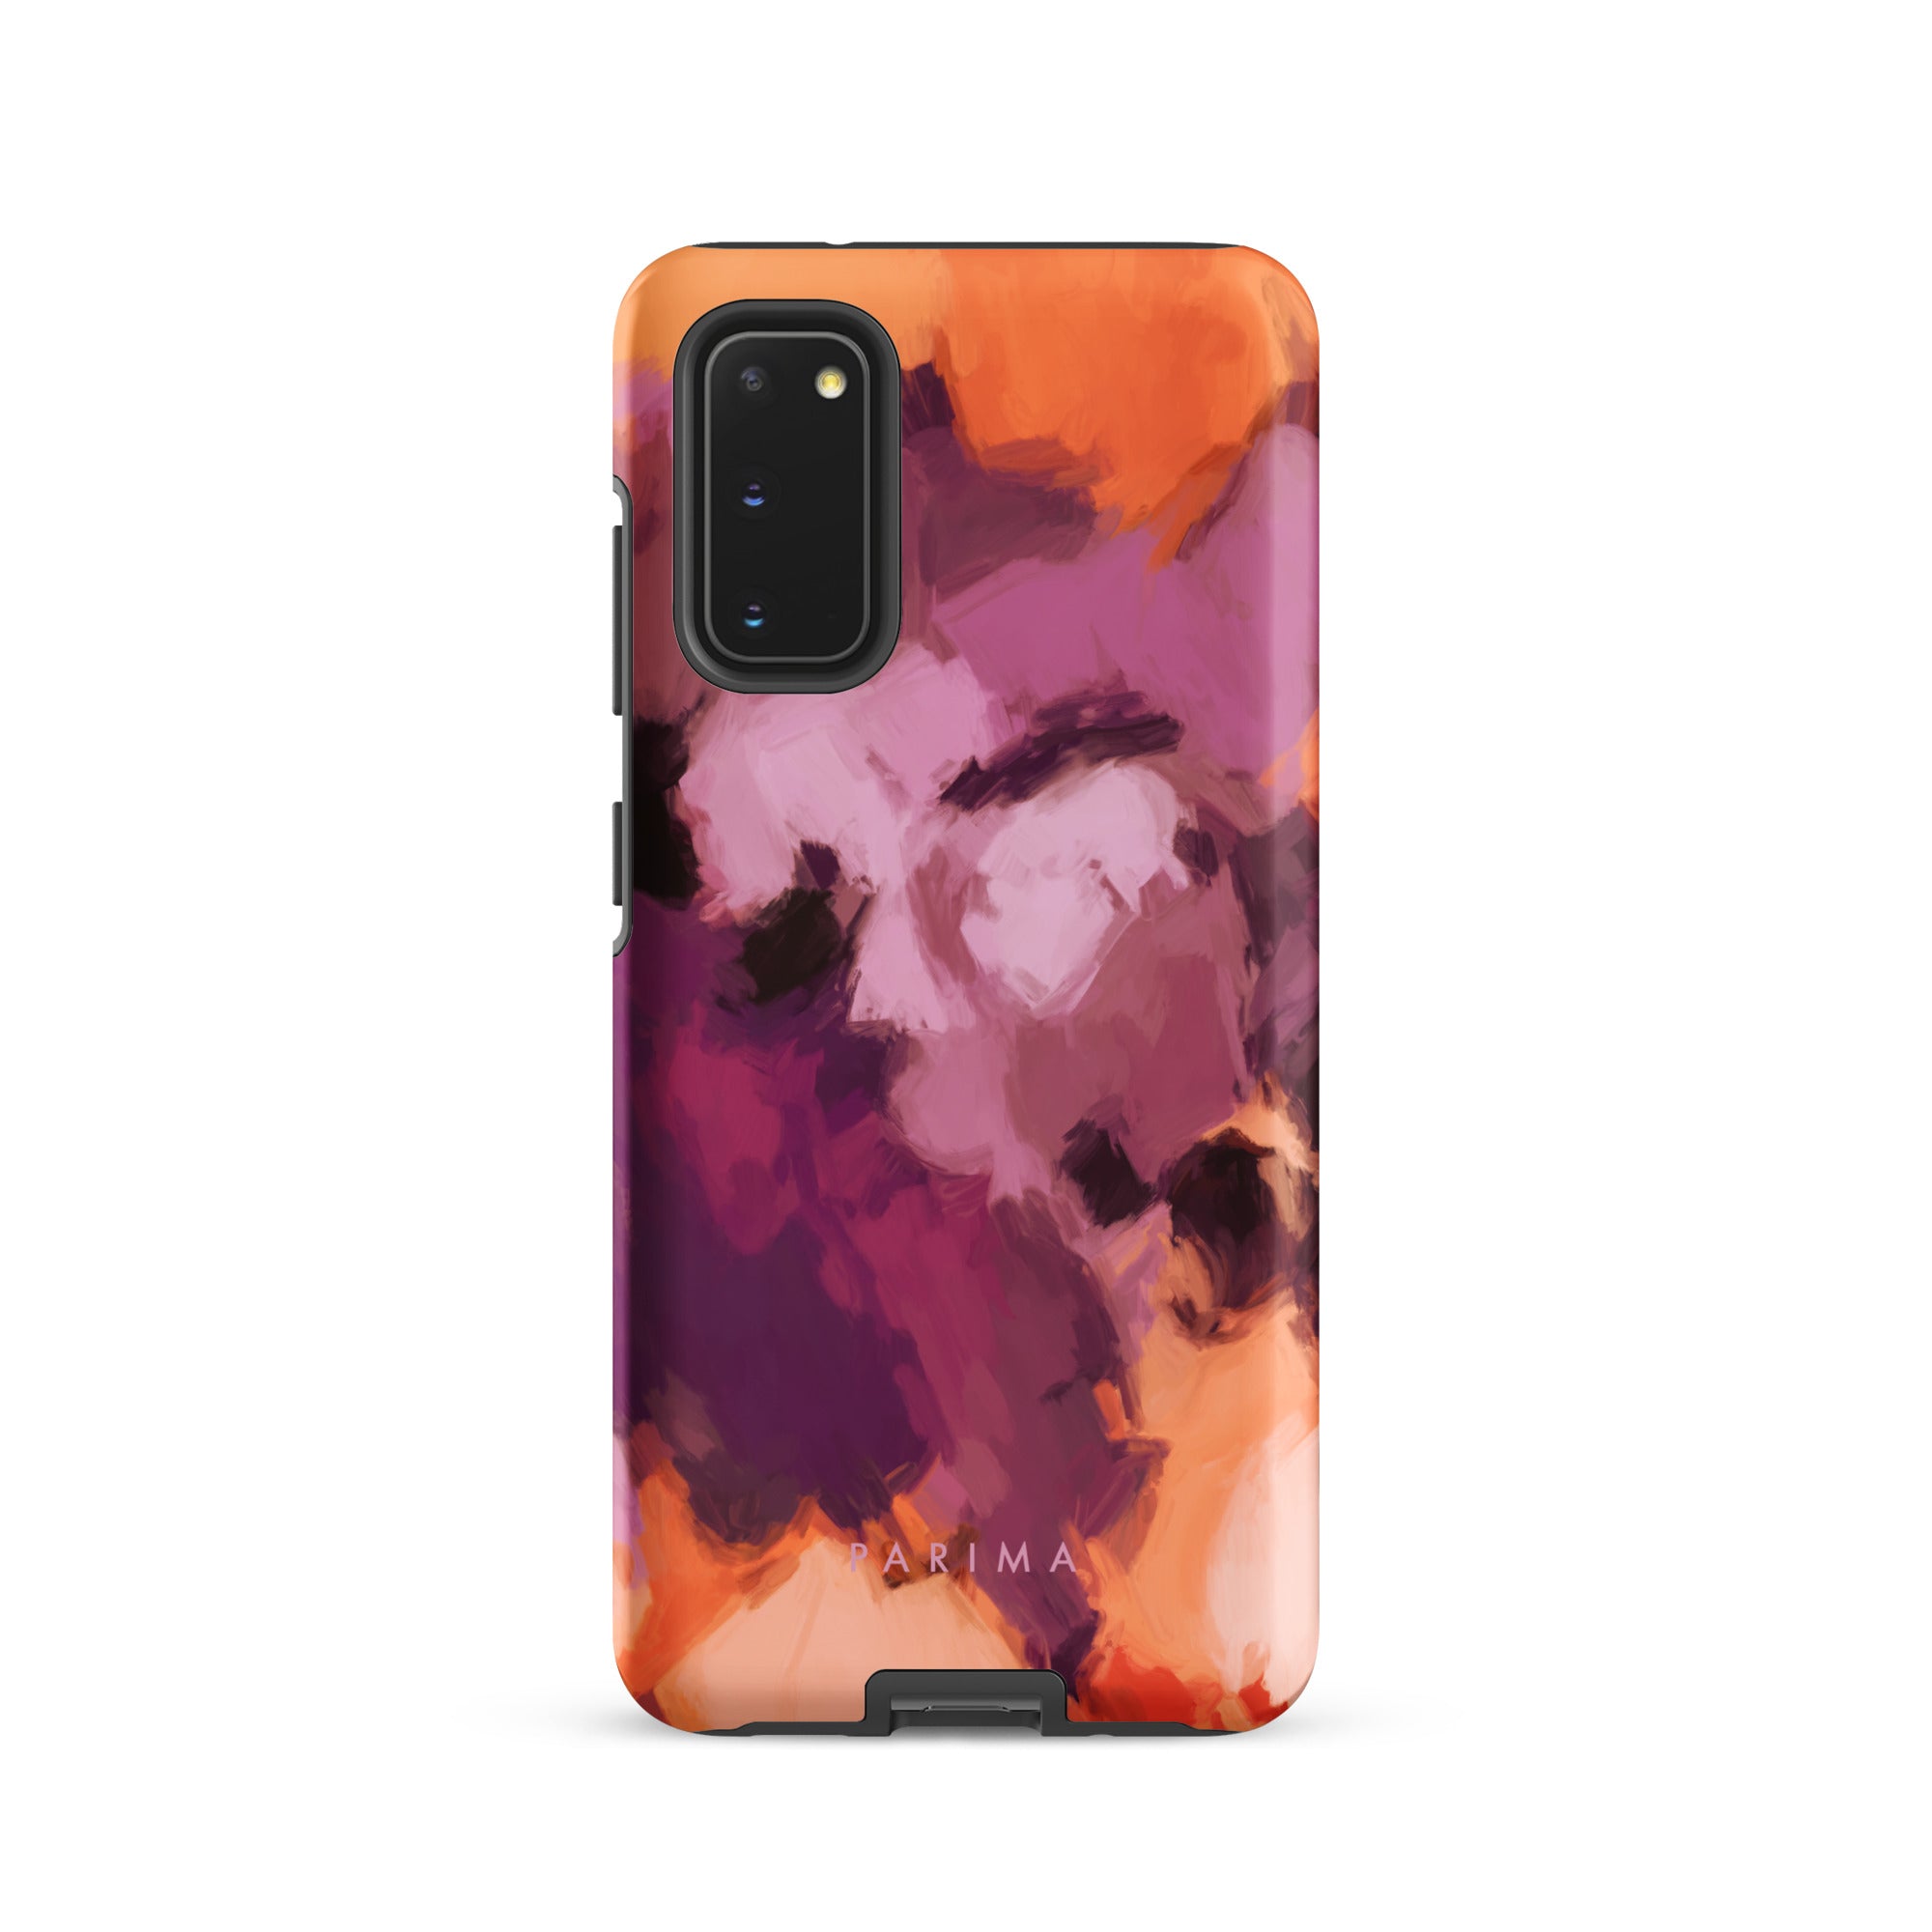 Lilac, purple and orange abstract art on Samsung Galaxy S20 tough case by Parima Studio